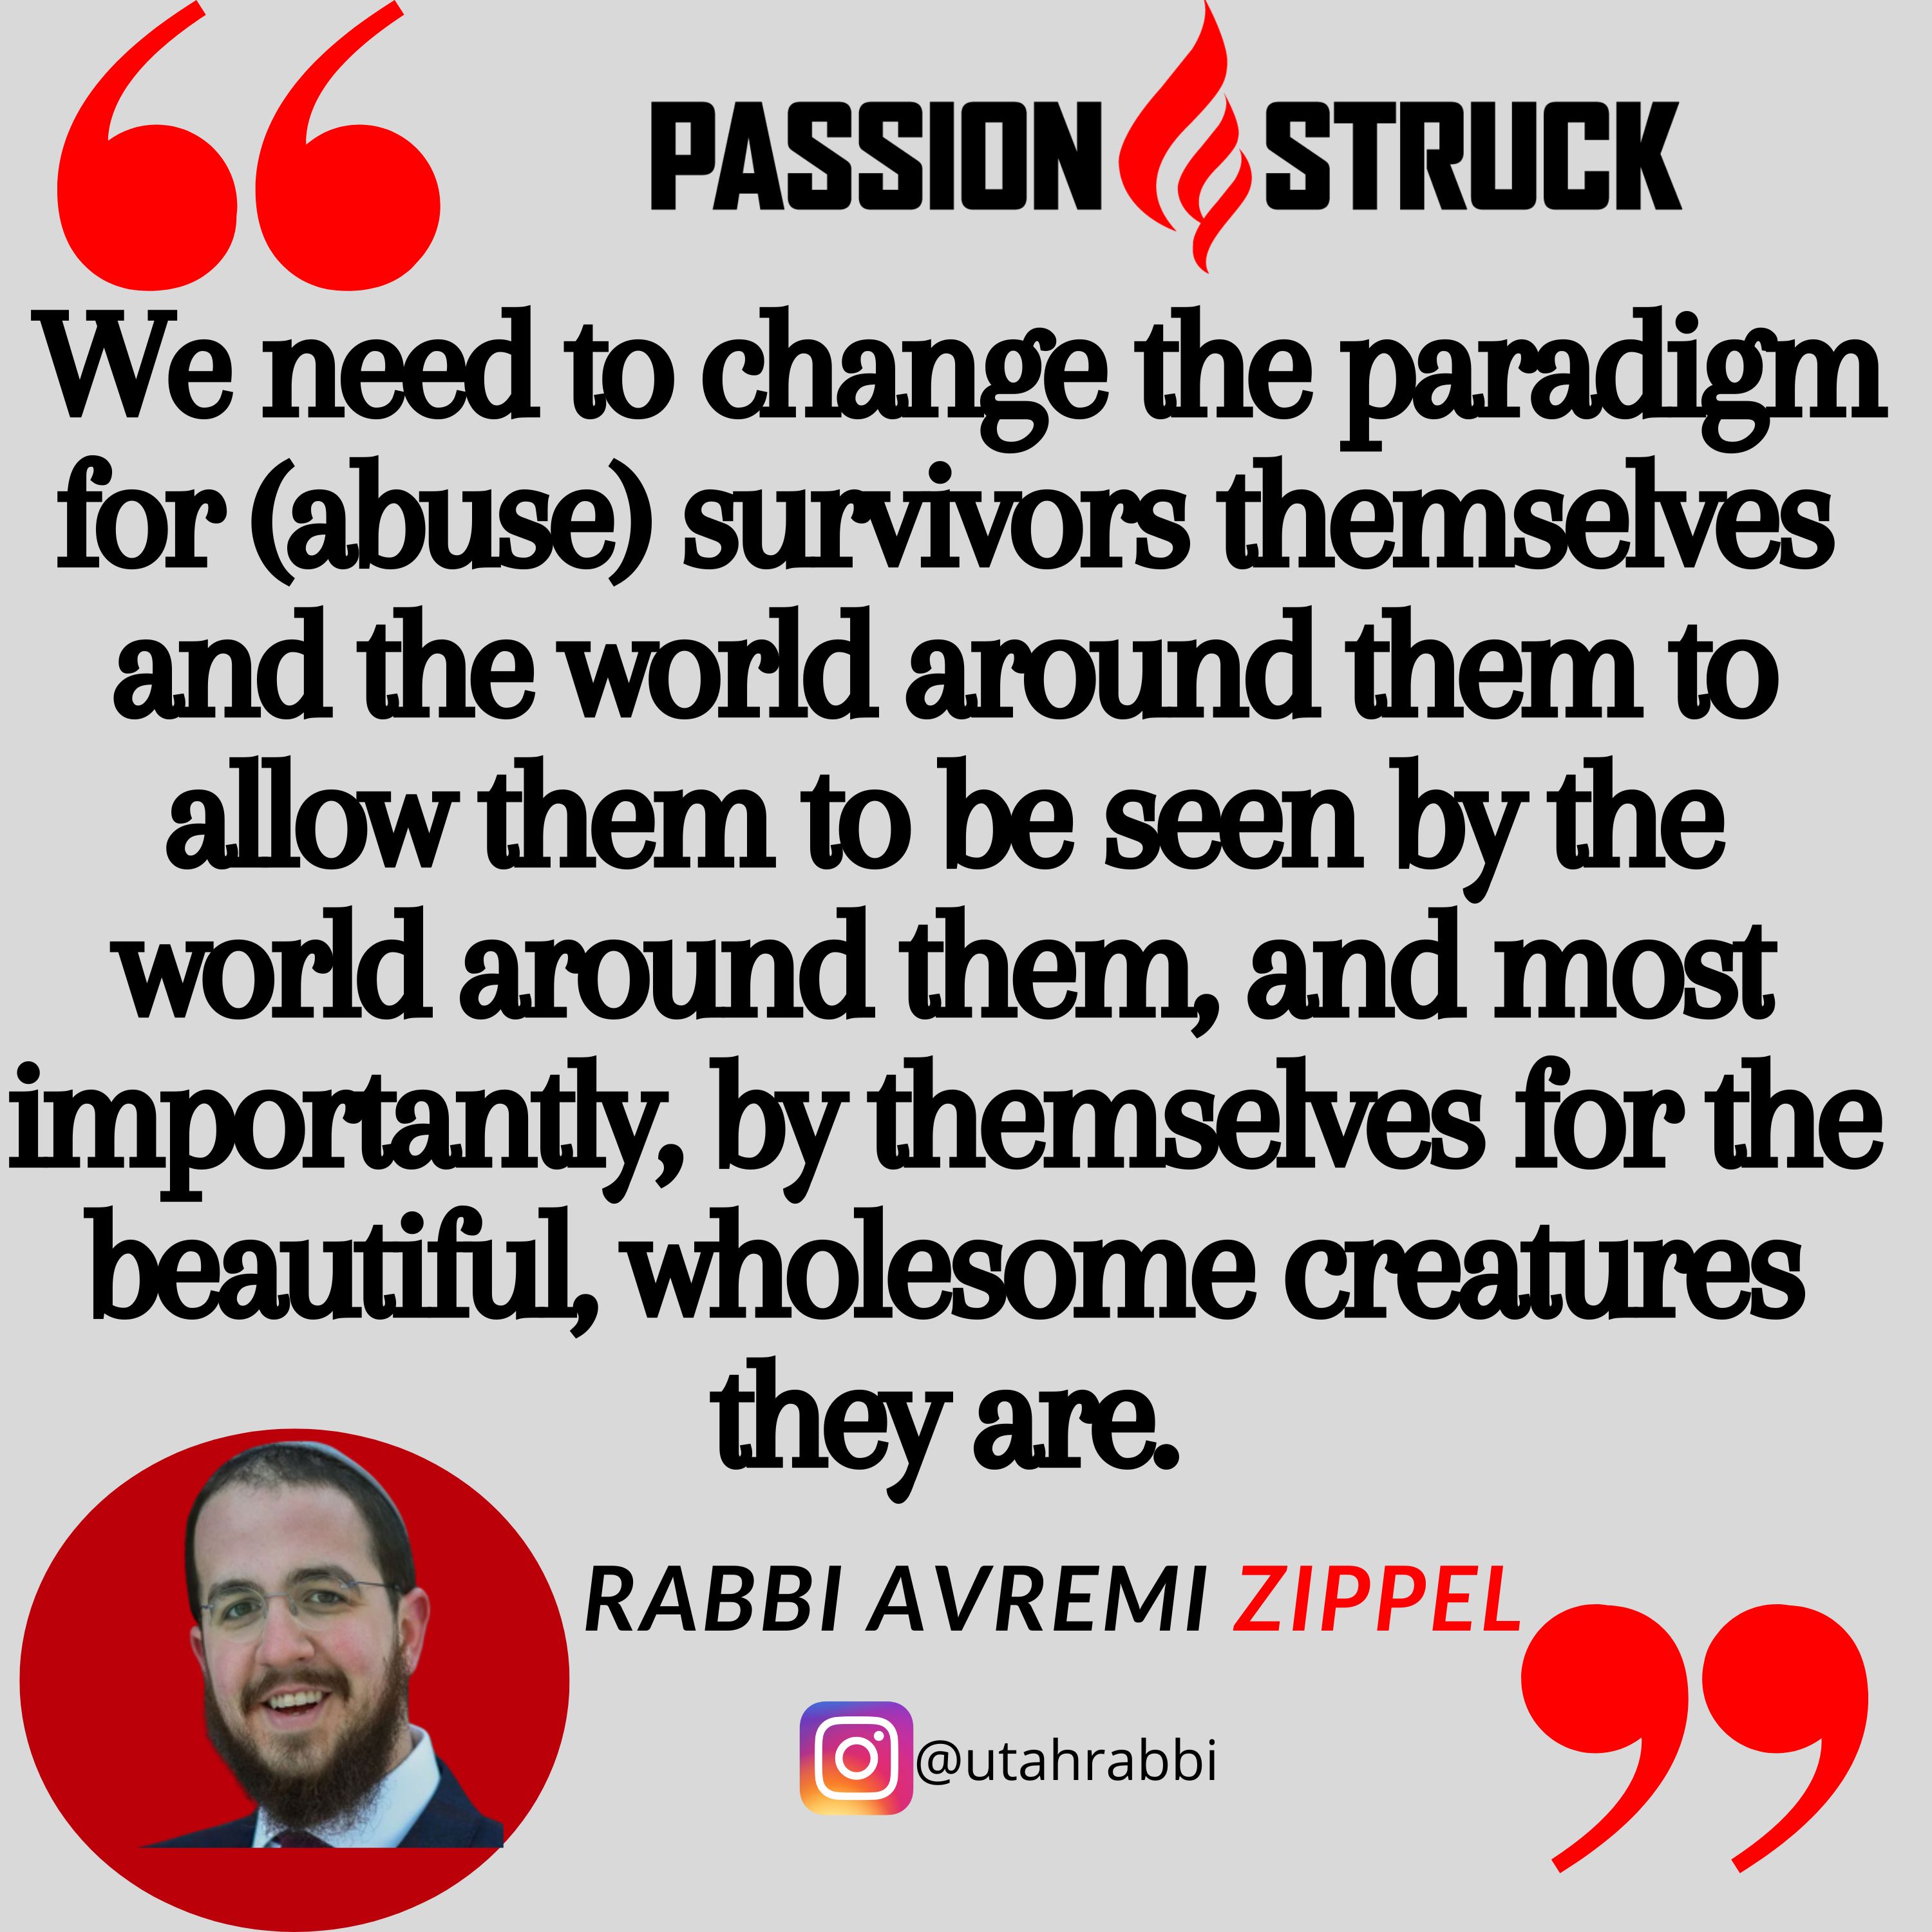 Quote by Rabbi Avremi Zippel on the Passion Struck podcast, "We need to change the paradigm for (abuse) survivors themselves and the world around them to allow them to be seen by the world around them, and most importantly, by themselves for the beautiful, wholesome creatures they are."